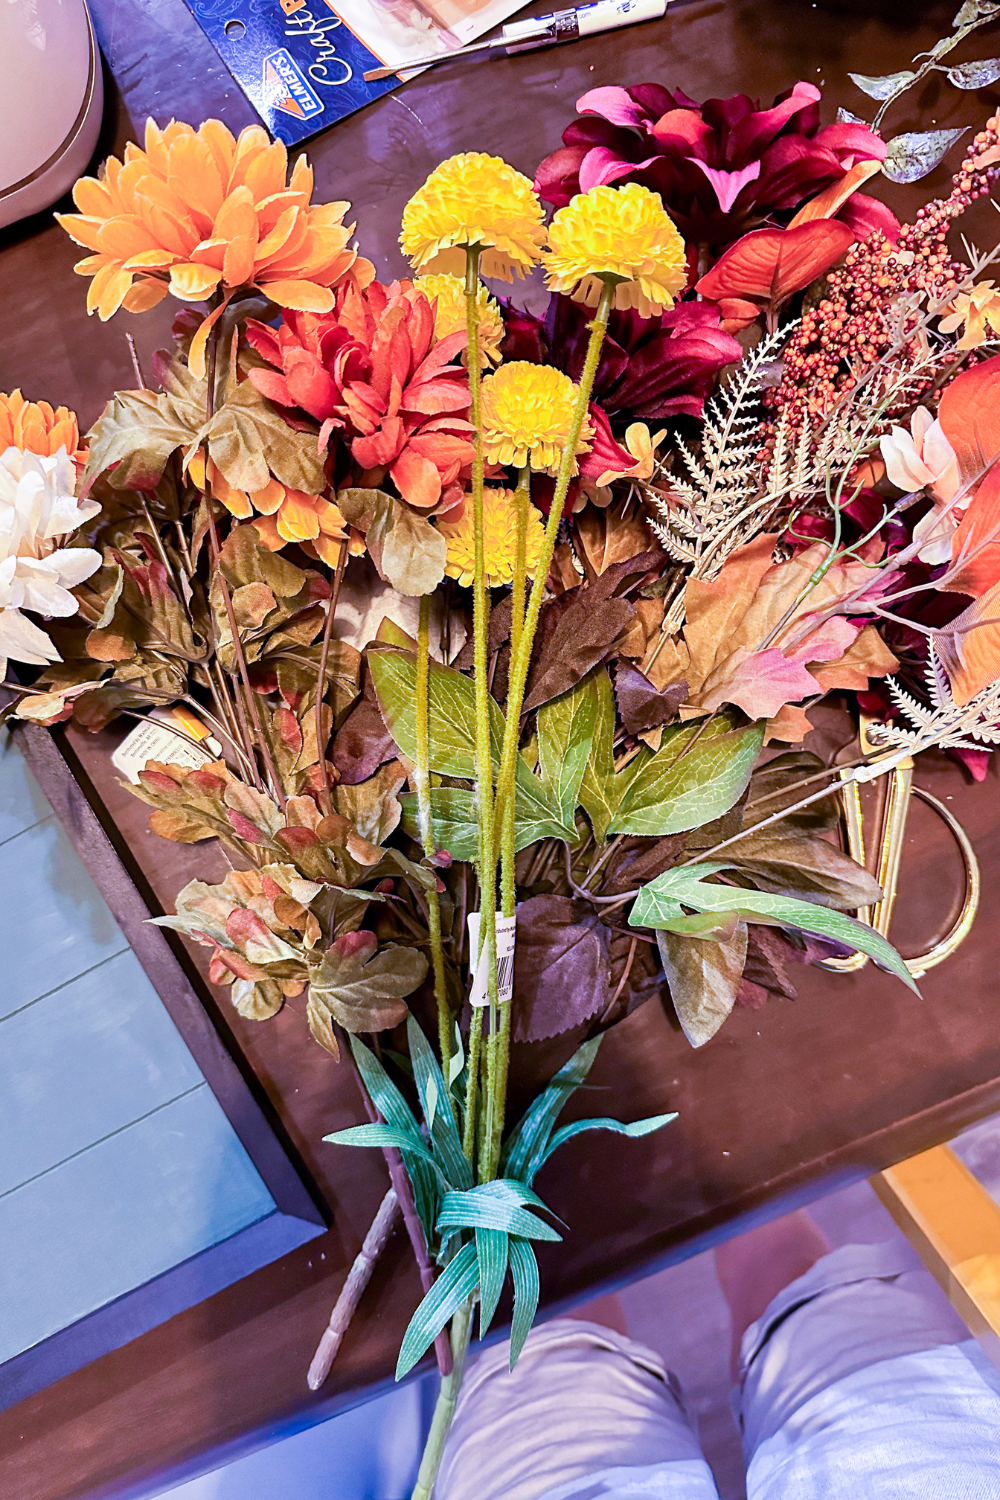 bundle of fake flowers in shades of orange, red, and yellow, with fall leaves and berries.